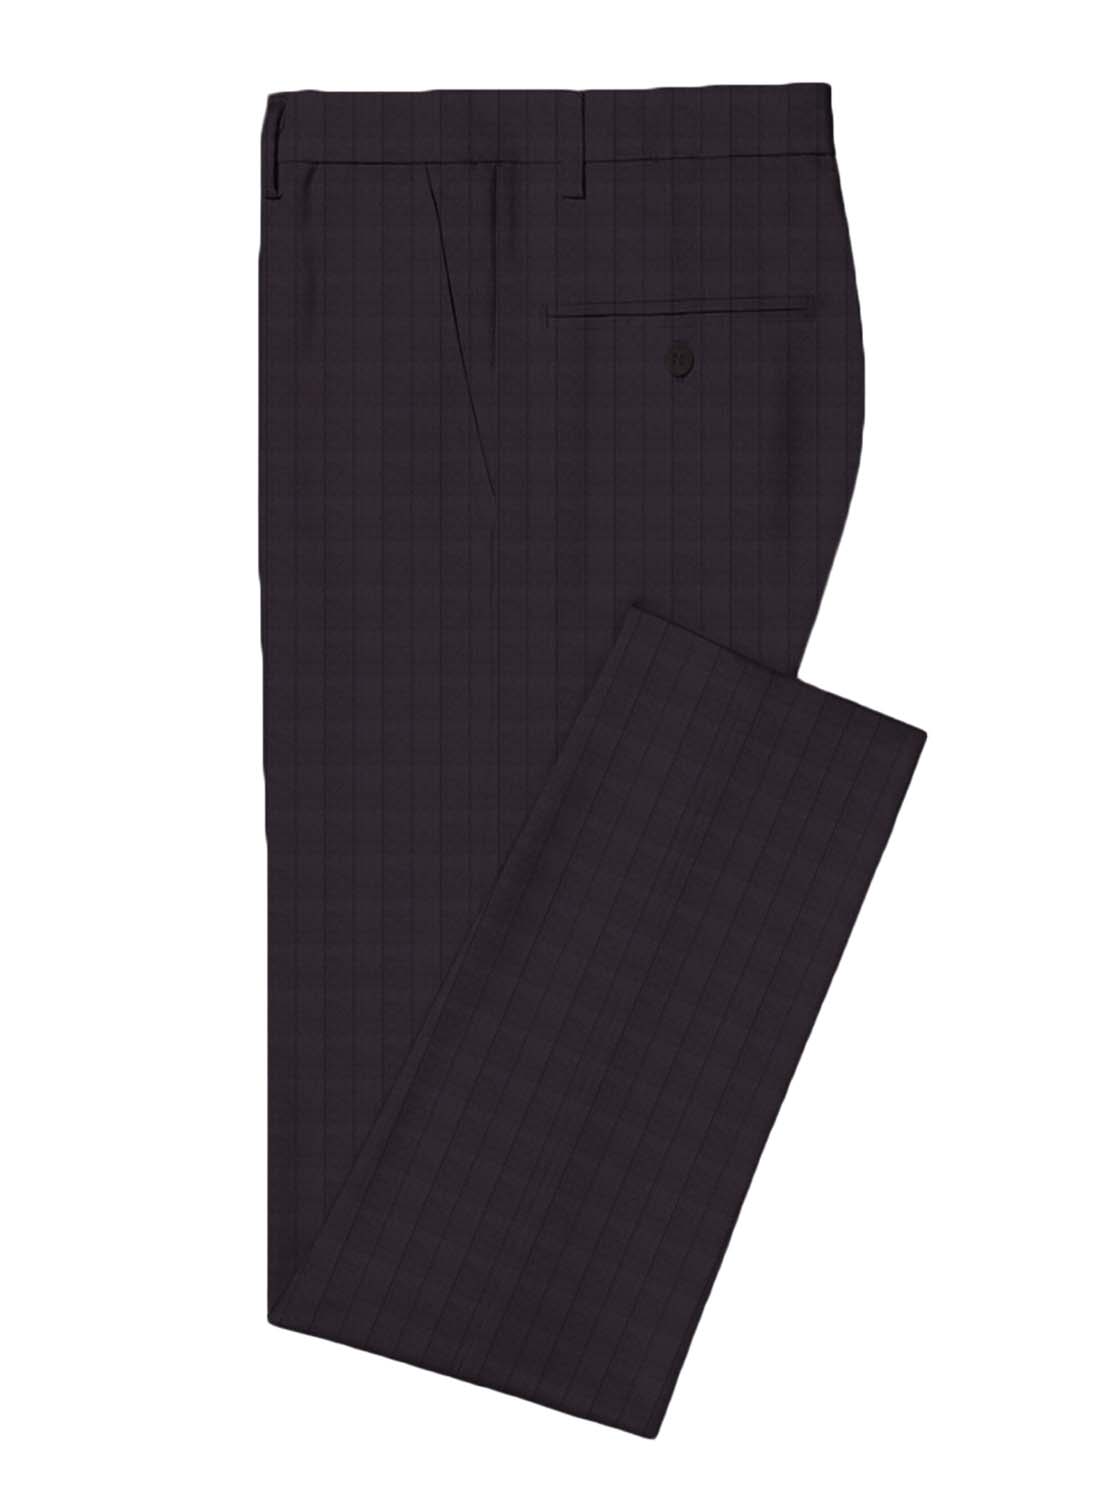 Canetti Men's Terry Rayon Checks 3.75 Meter Unstitched Suiting Fabric (Dark Wine)